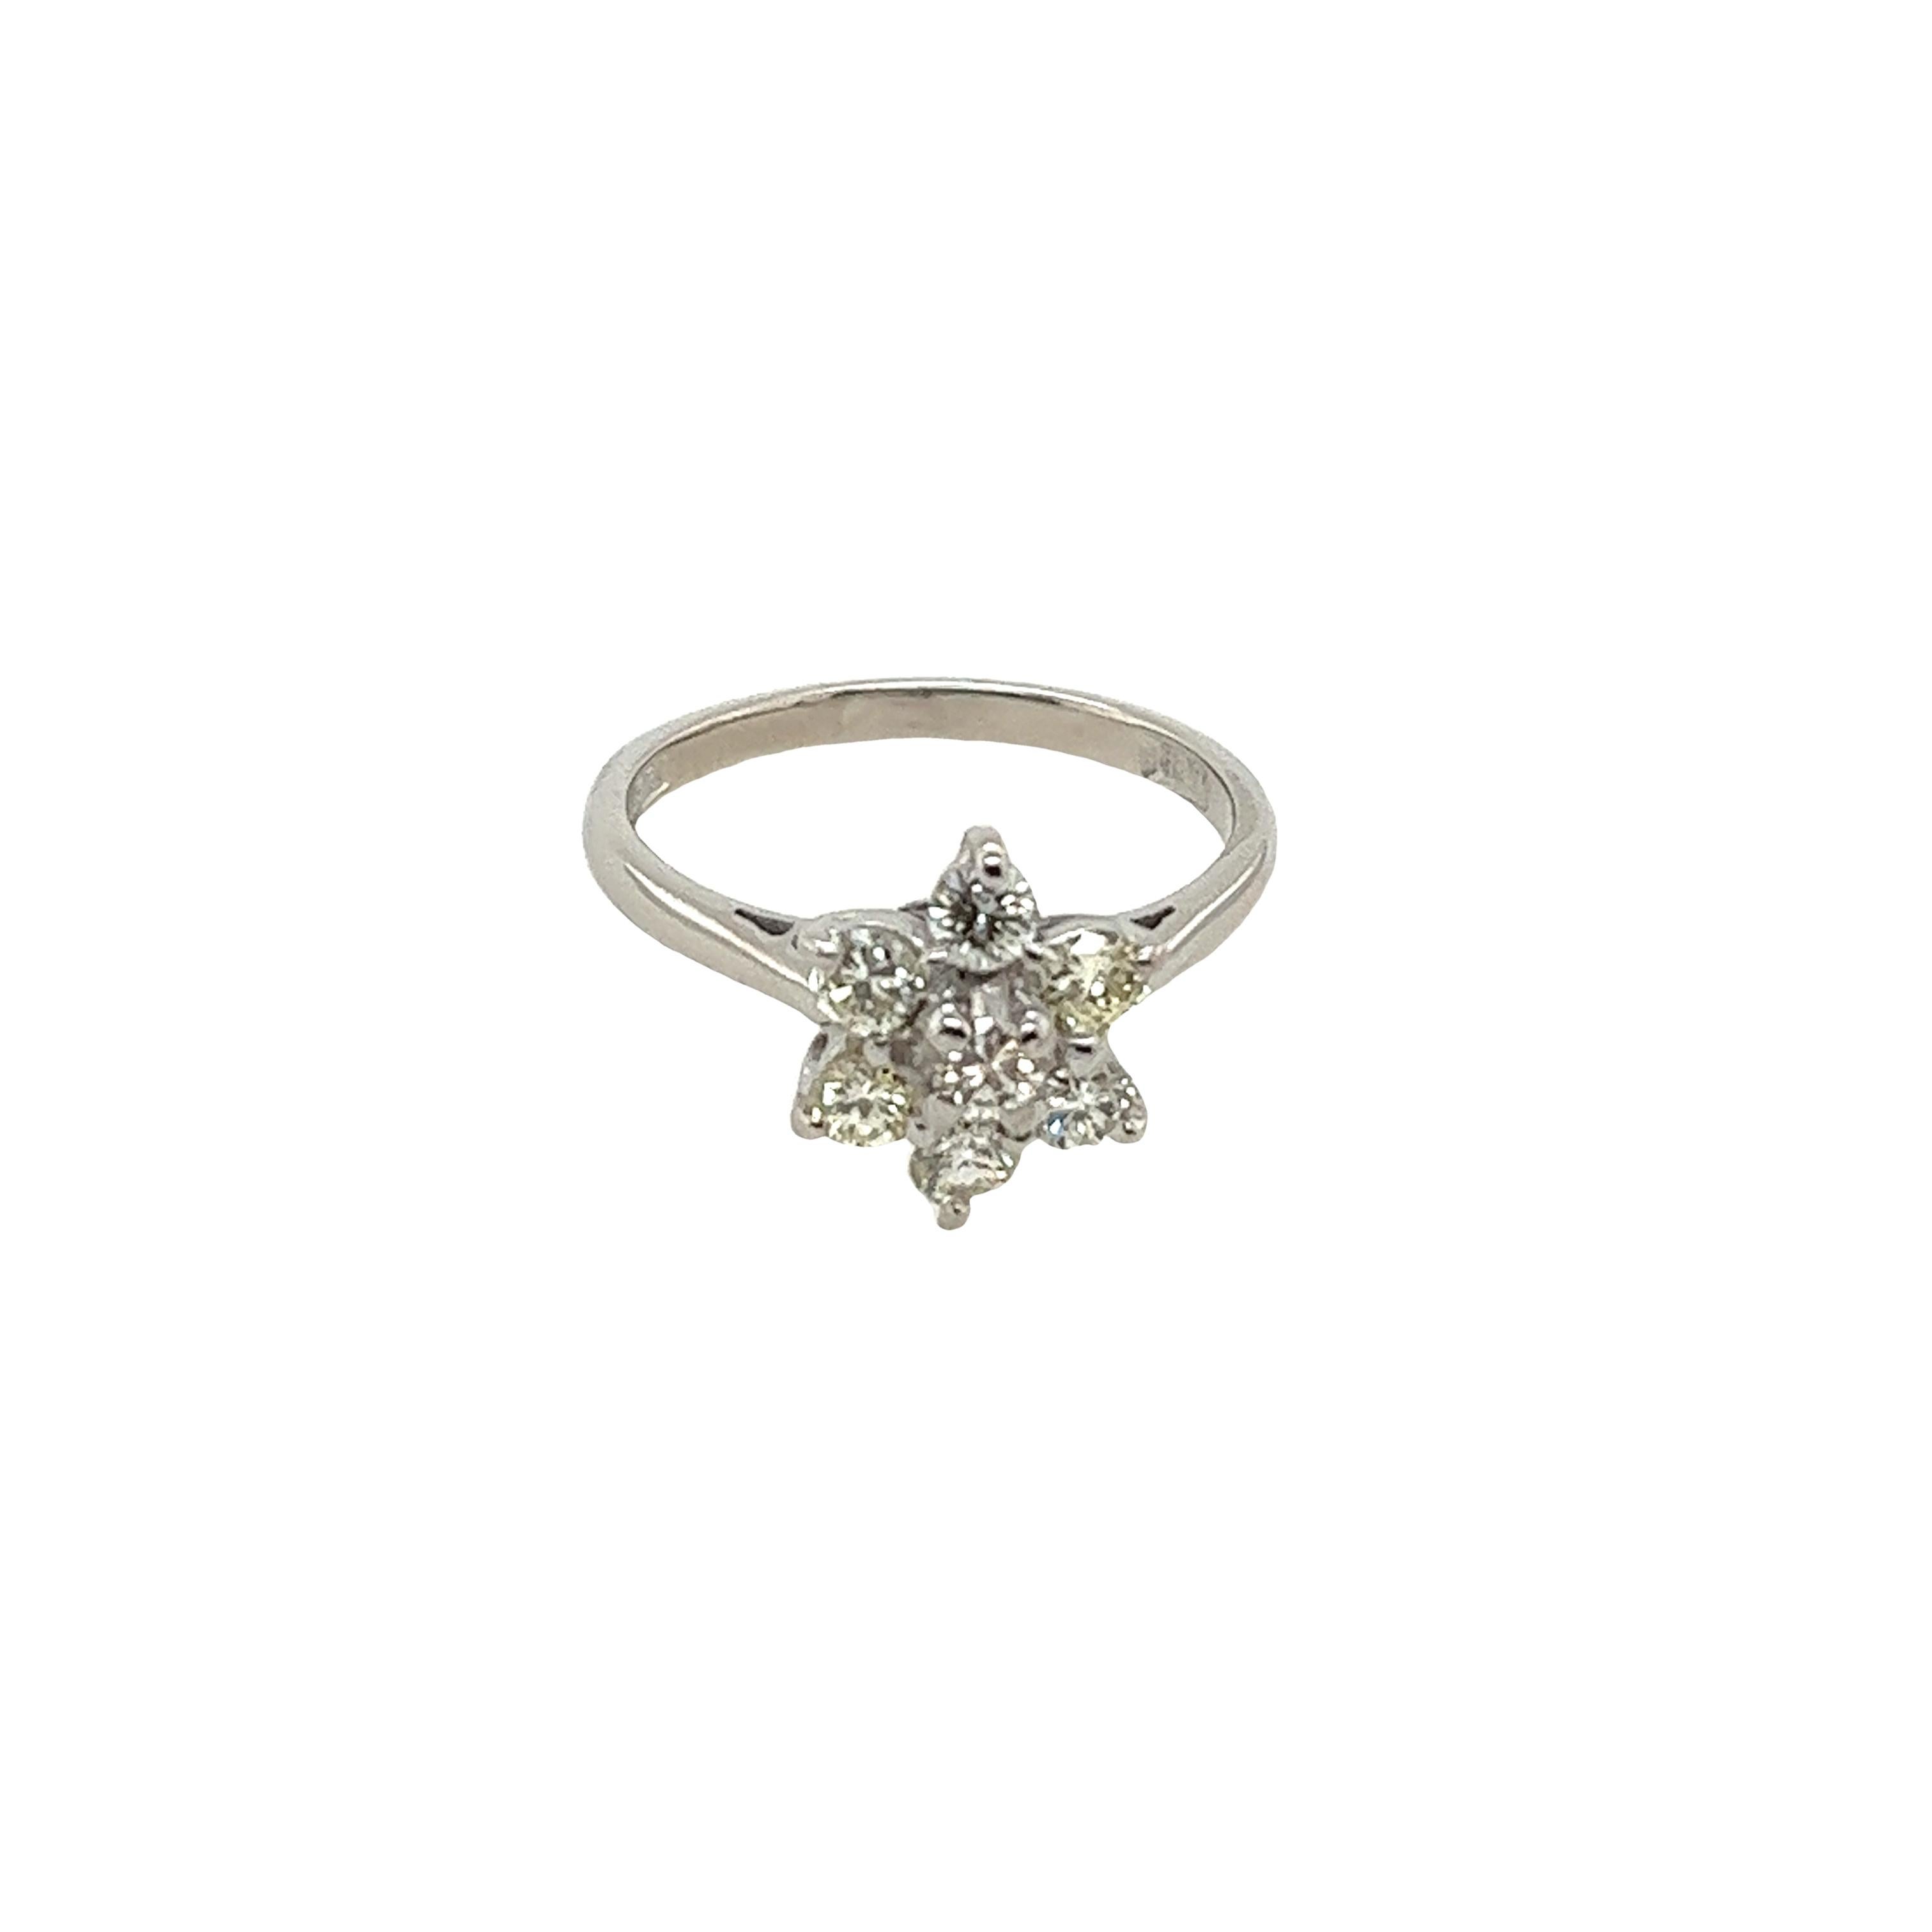 An elegant diamond cluster ring for your engagement or anniversary, 
set with 7 round brilliant cut diamonds 0.50ct I-K colour and SI1 clarity 
in an 18ct white gold setting.
Total Diamond Weight: 0.50ct
Diamond Colour: I-K
Diamond Clarity: SI
Width